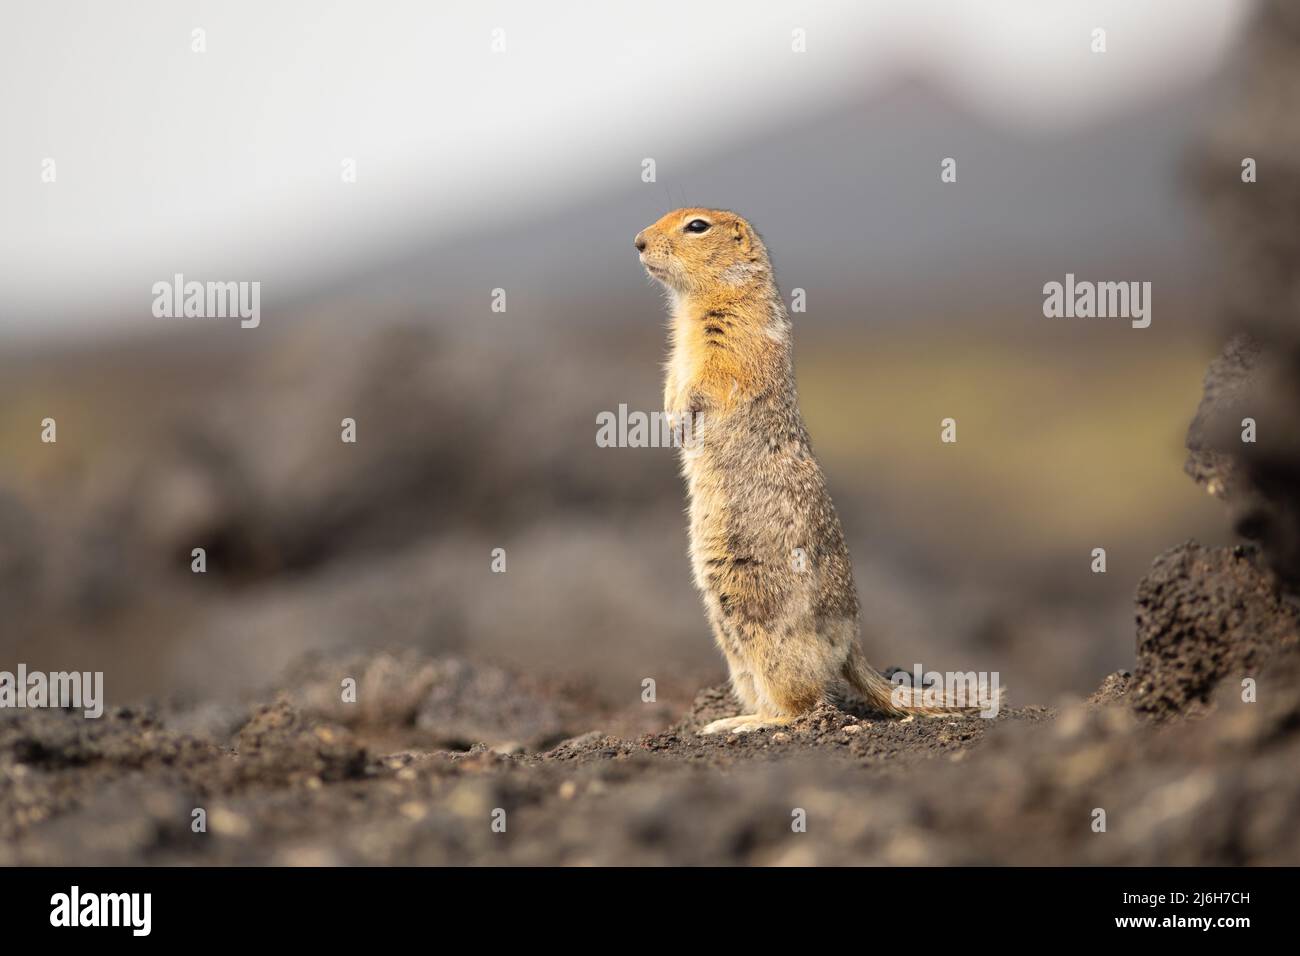 Standing Arctic ground squirrel or parka in Kamchatka near Tolbachik volcano, Russia Stock Photo